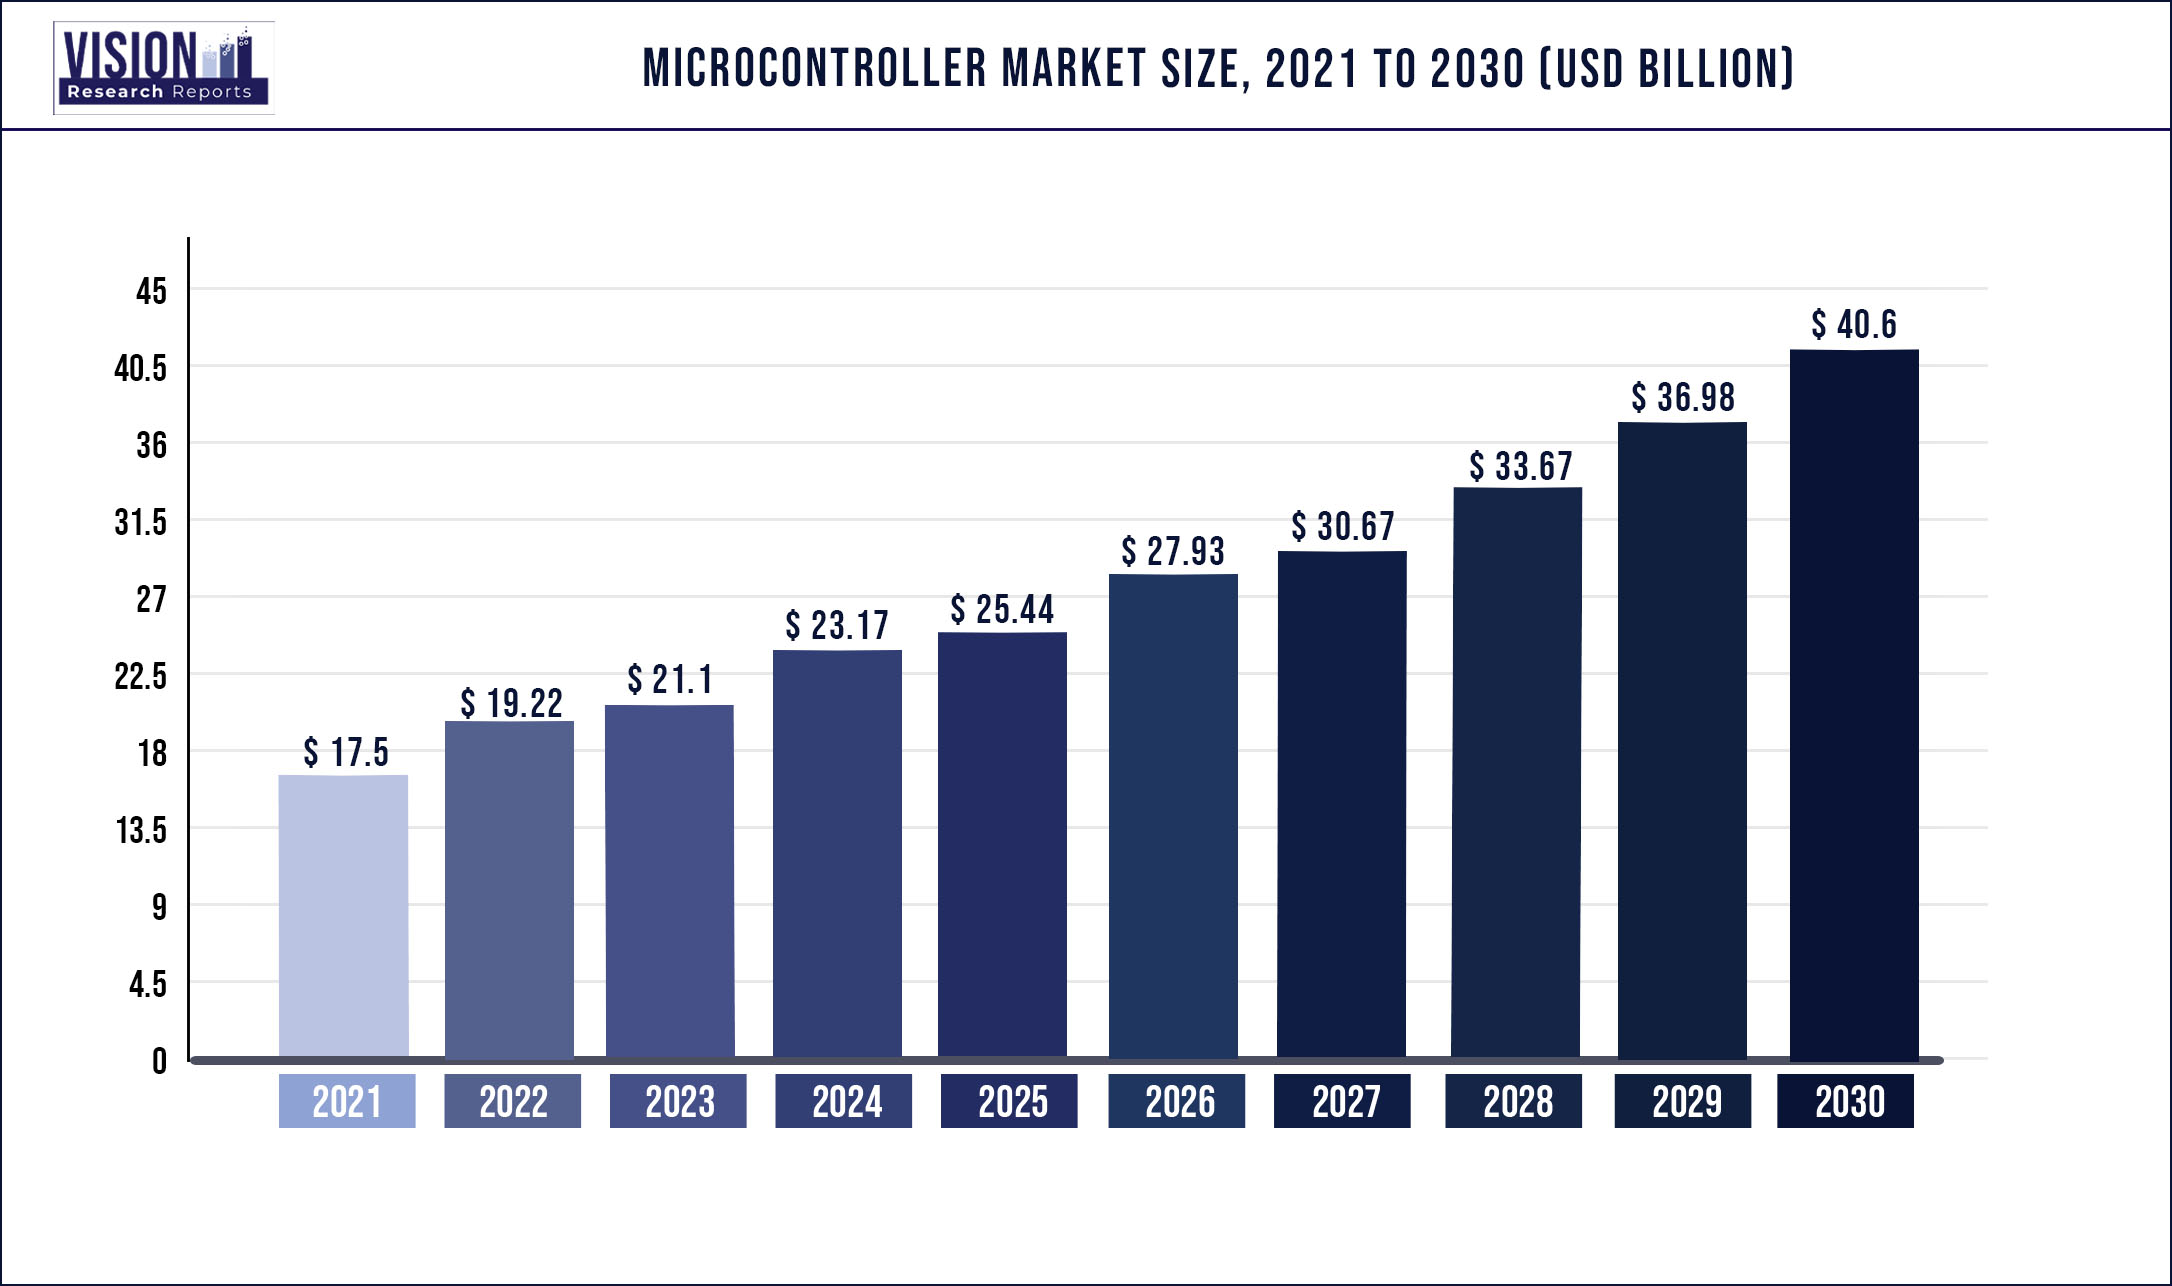 Microcontroller Market Size 2021 to 2030